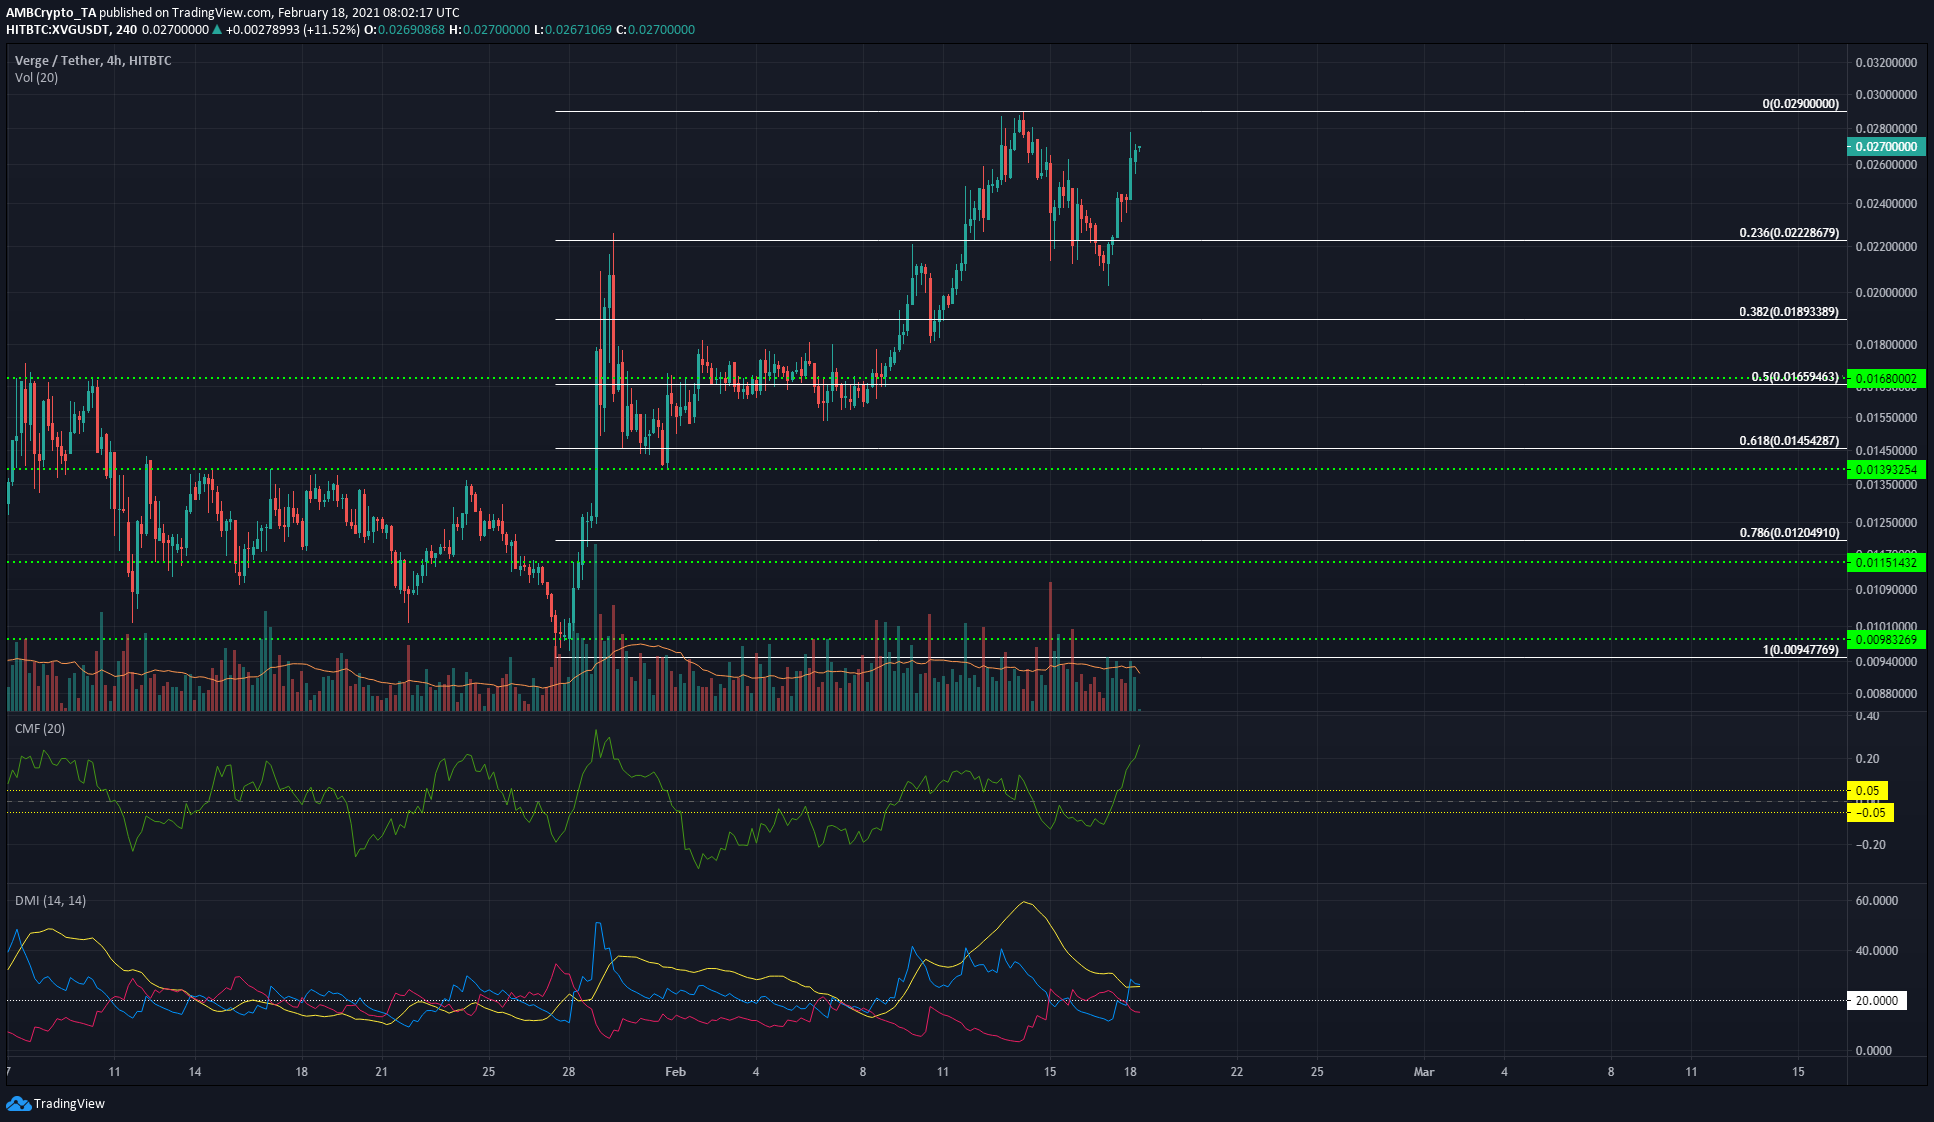 Tron, Aave, Verge Price Analysis: 18 February